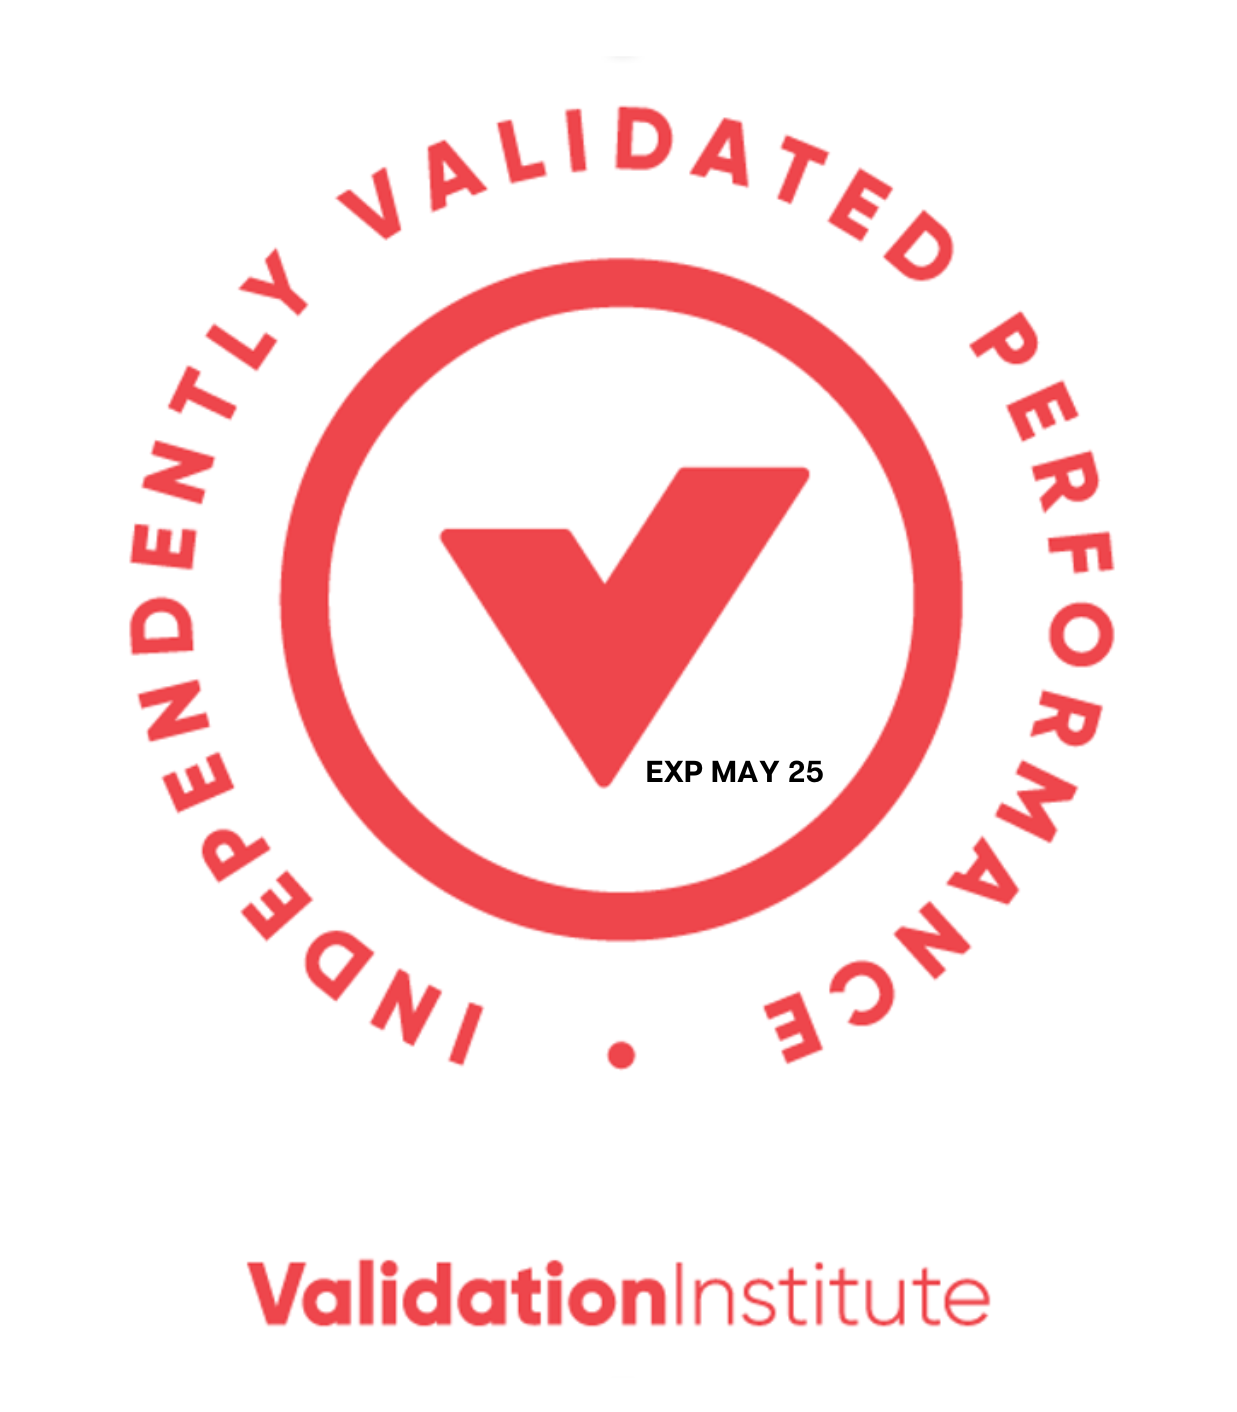 Find a TPA Partner with Validated Results